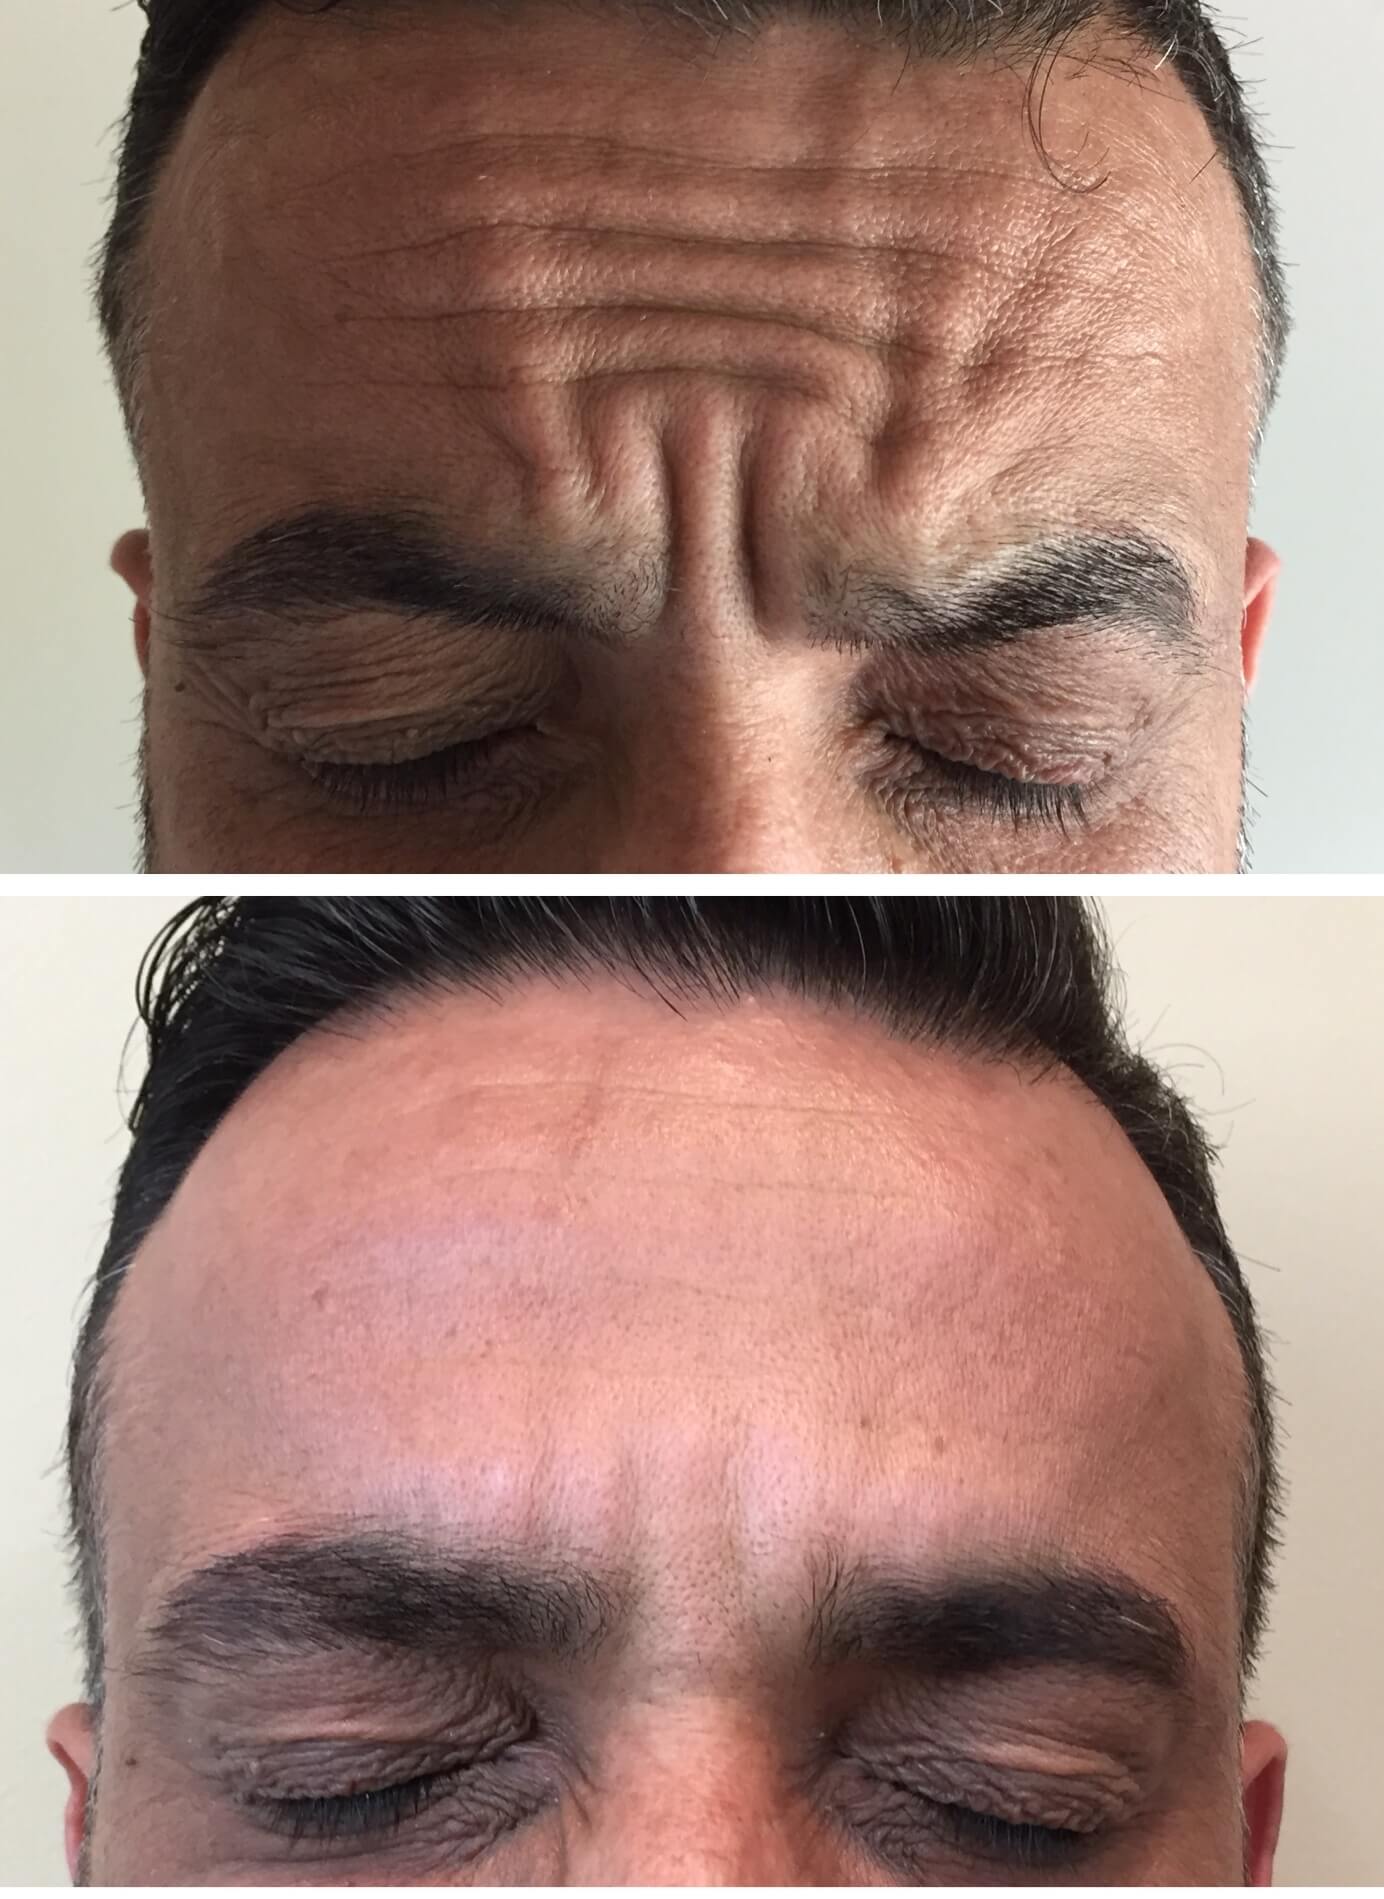 Forehead wrinkle treatment for men before and after